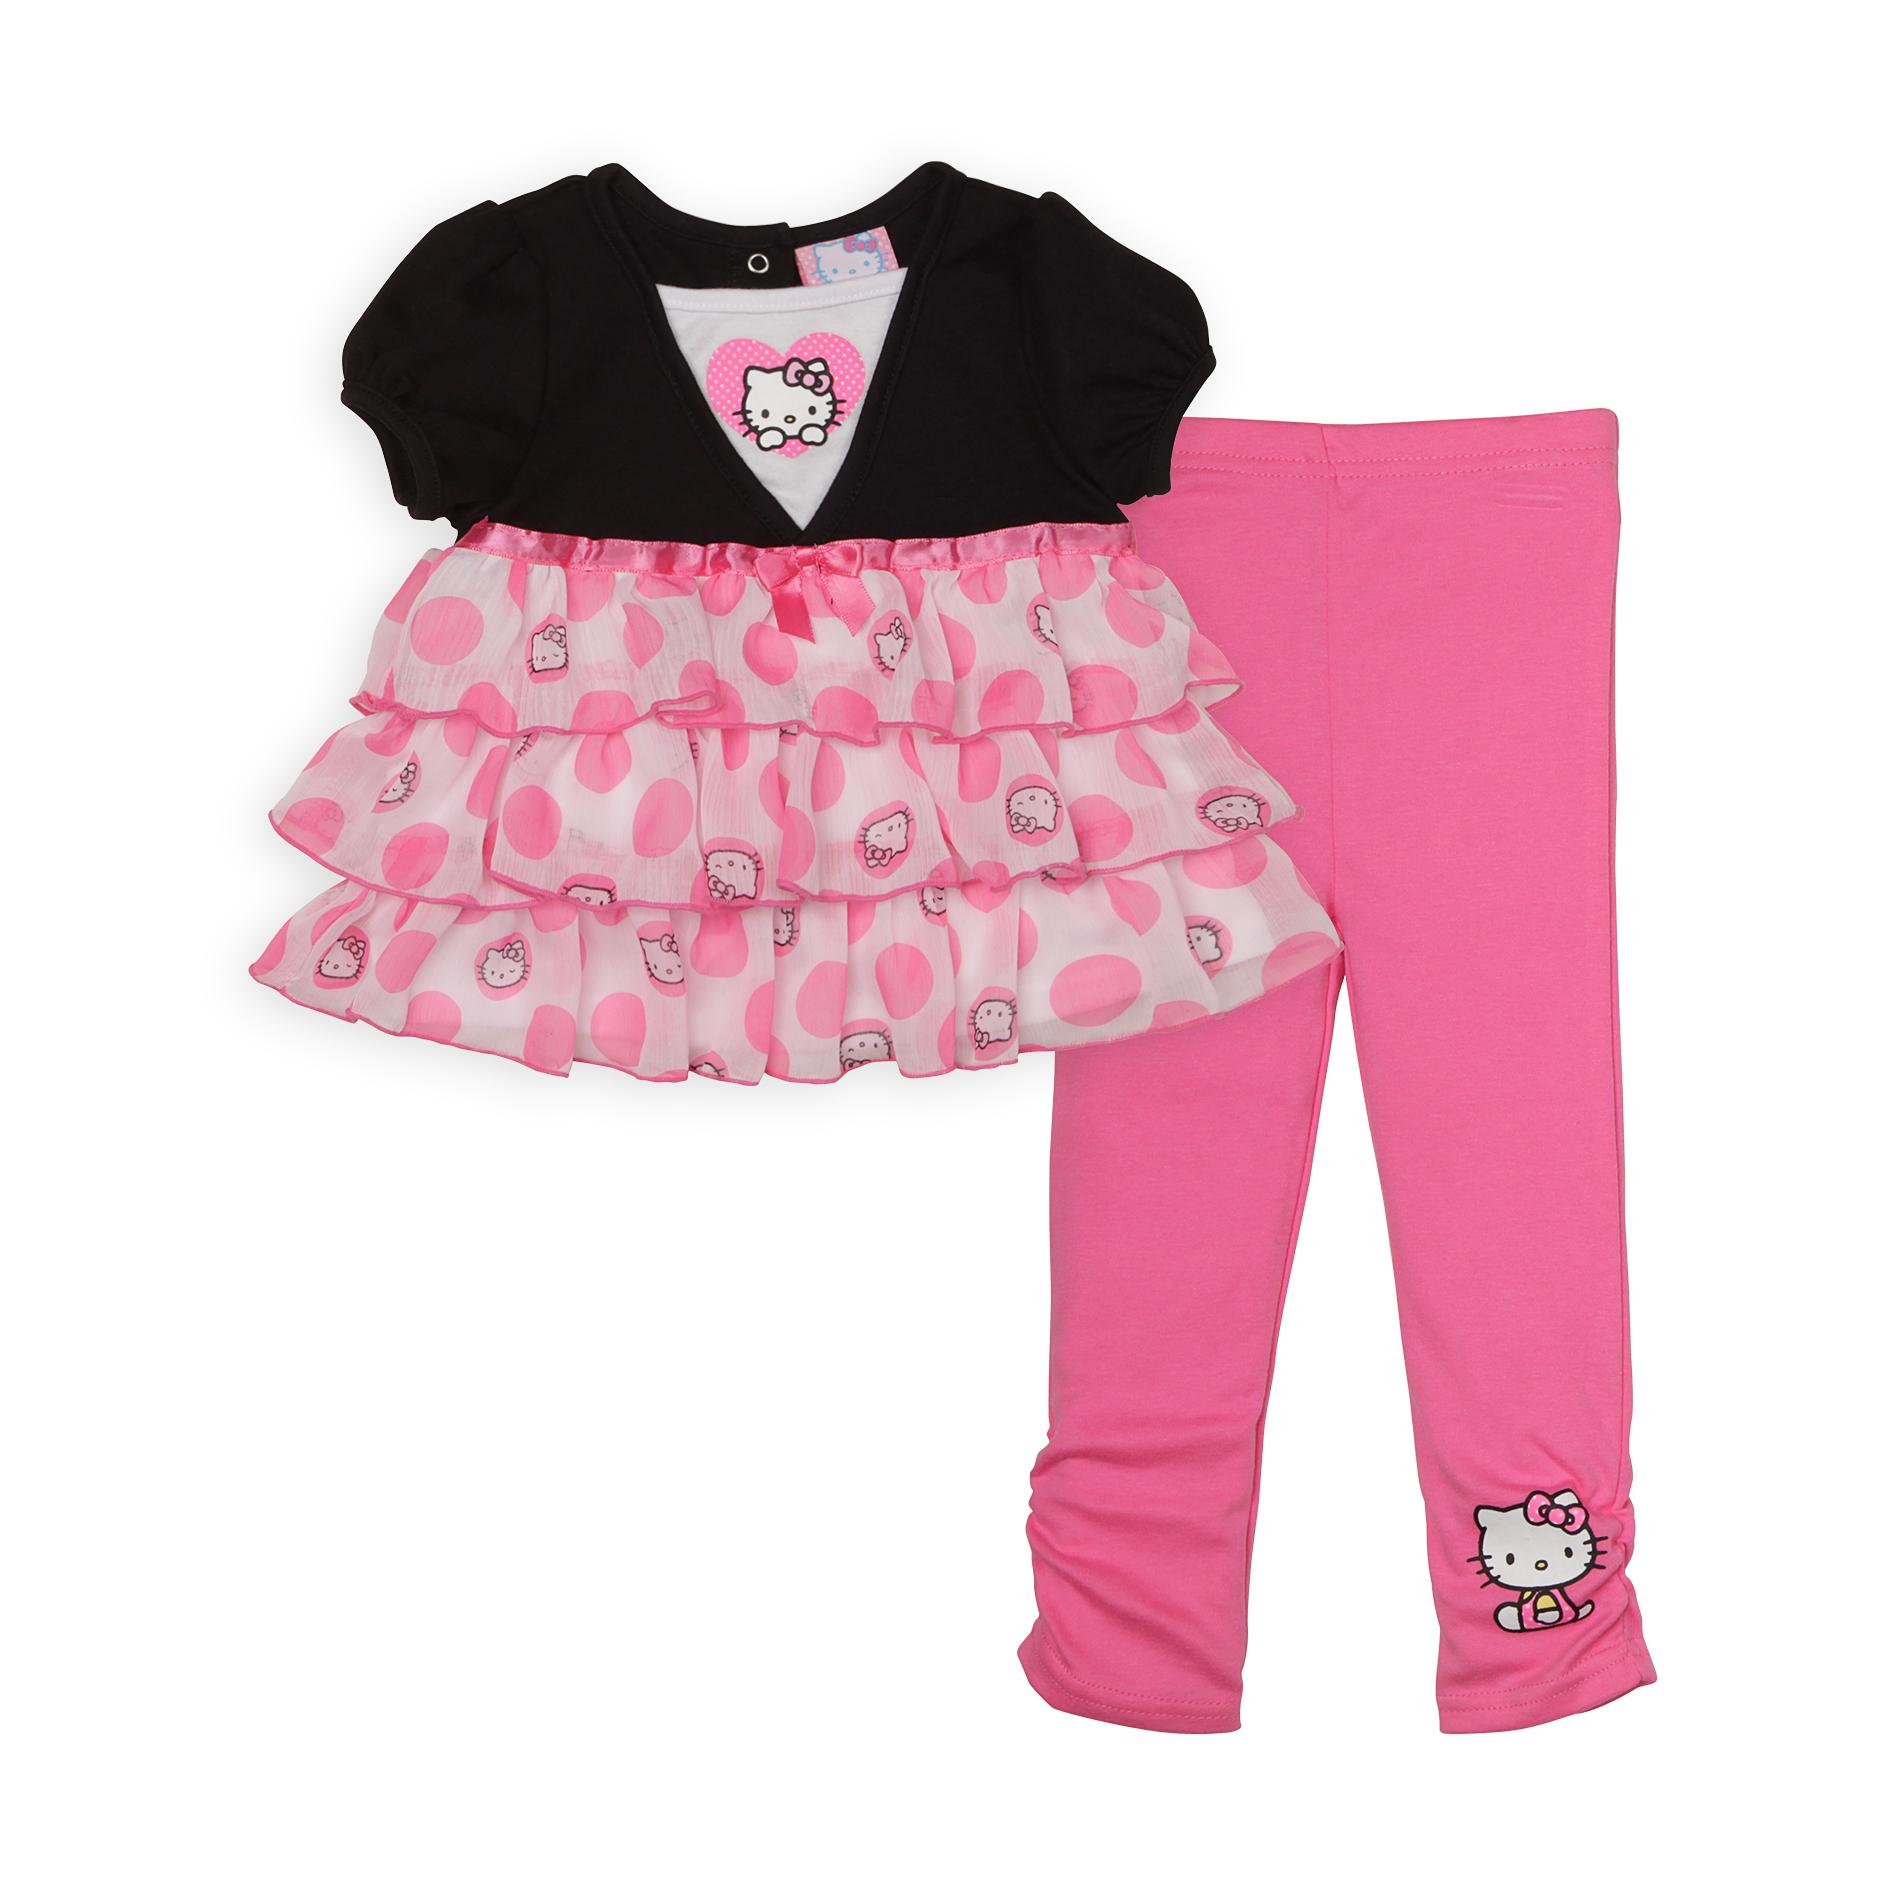 Hello Kitty Infant & Toddler Girl's Tiered Ruffle Top & Leggings